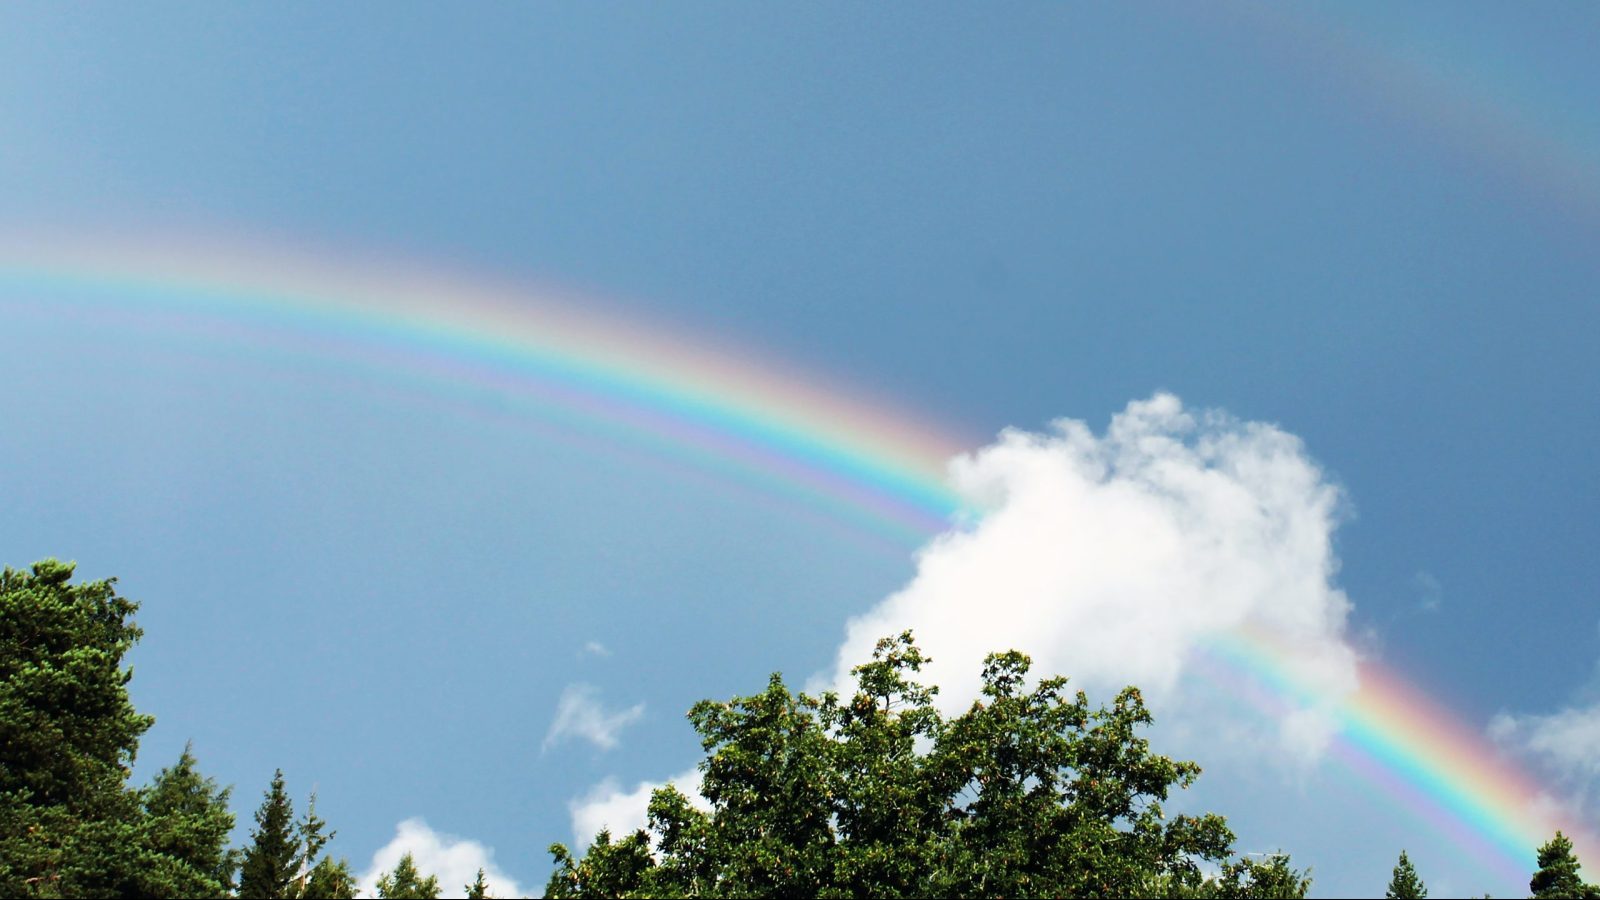 A rainbow behind a cloud, above some trees